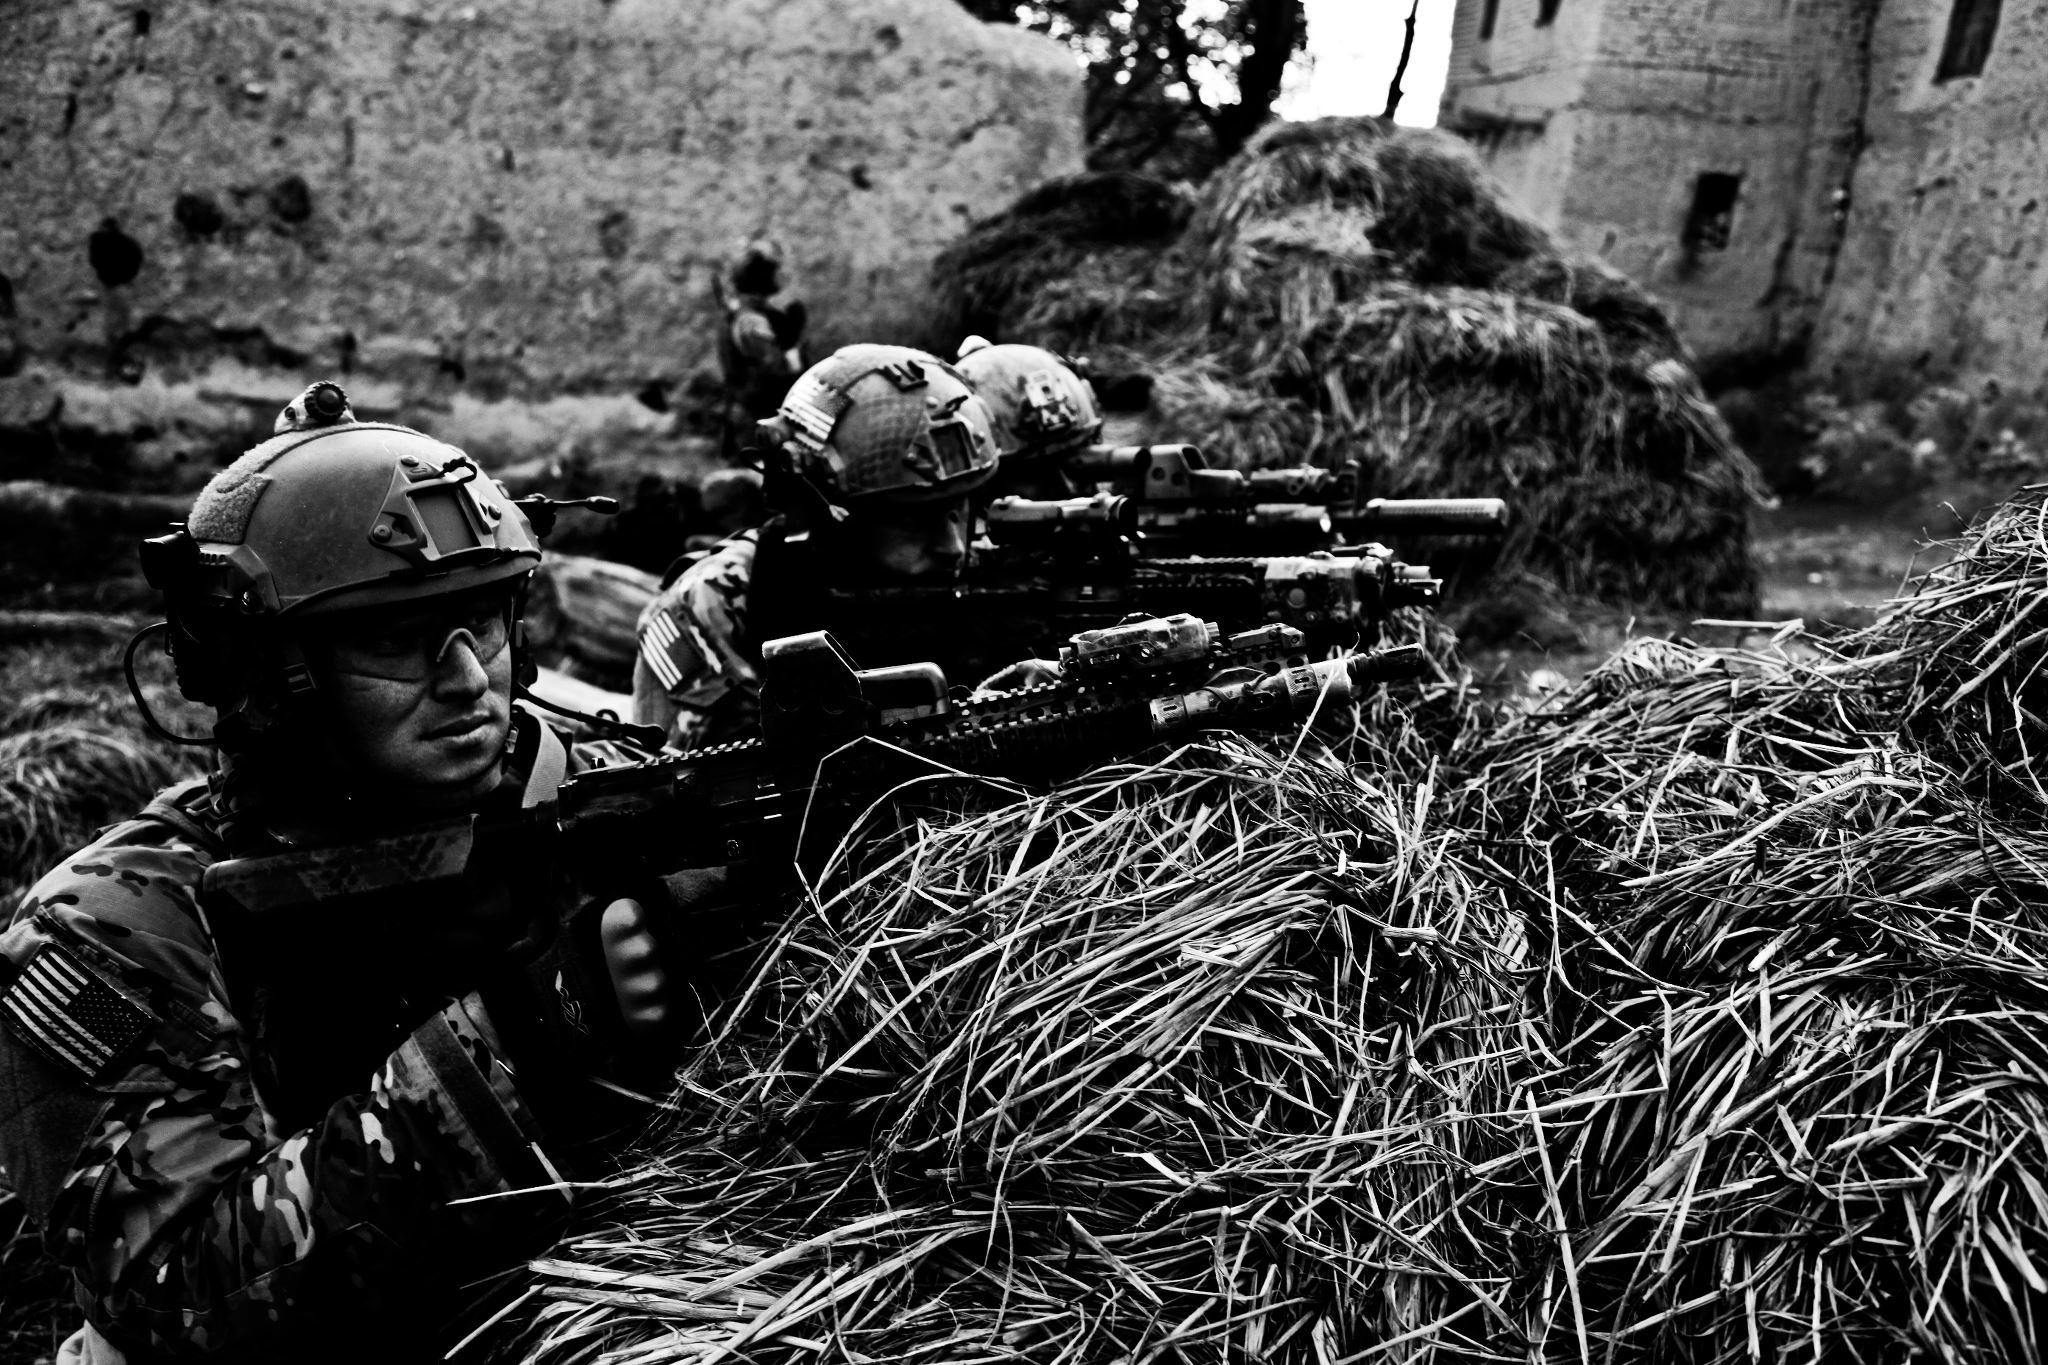 Rangers The 75th Ranger Regiment During Capture Of A High Value